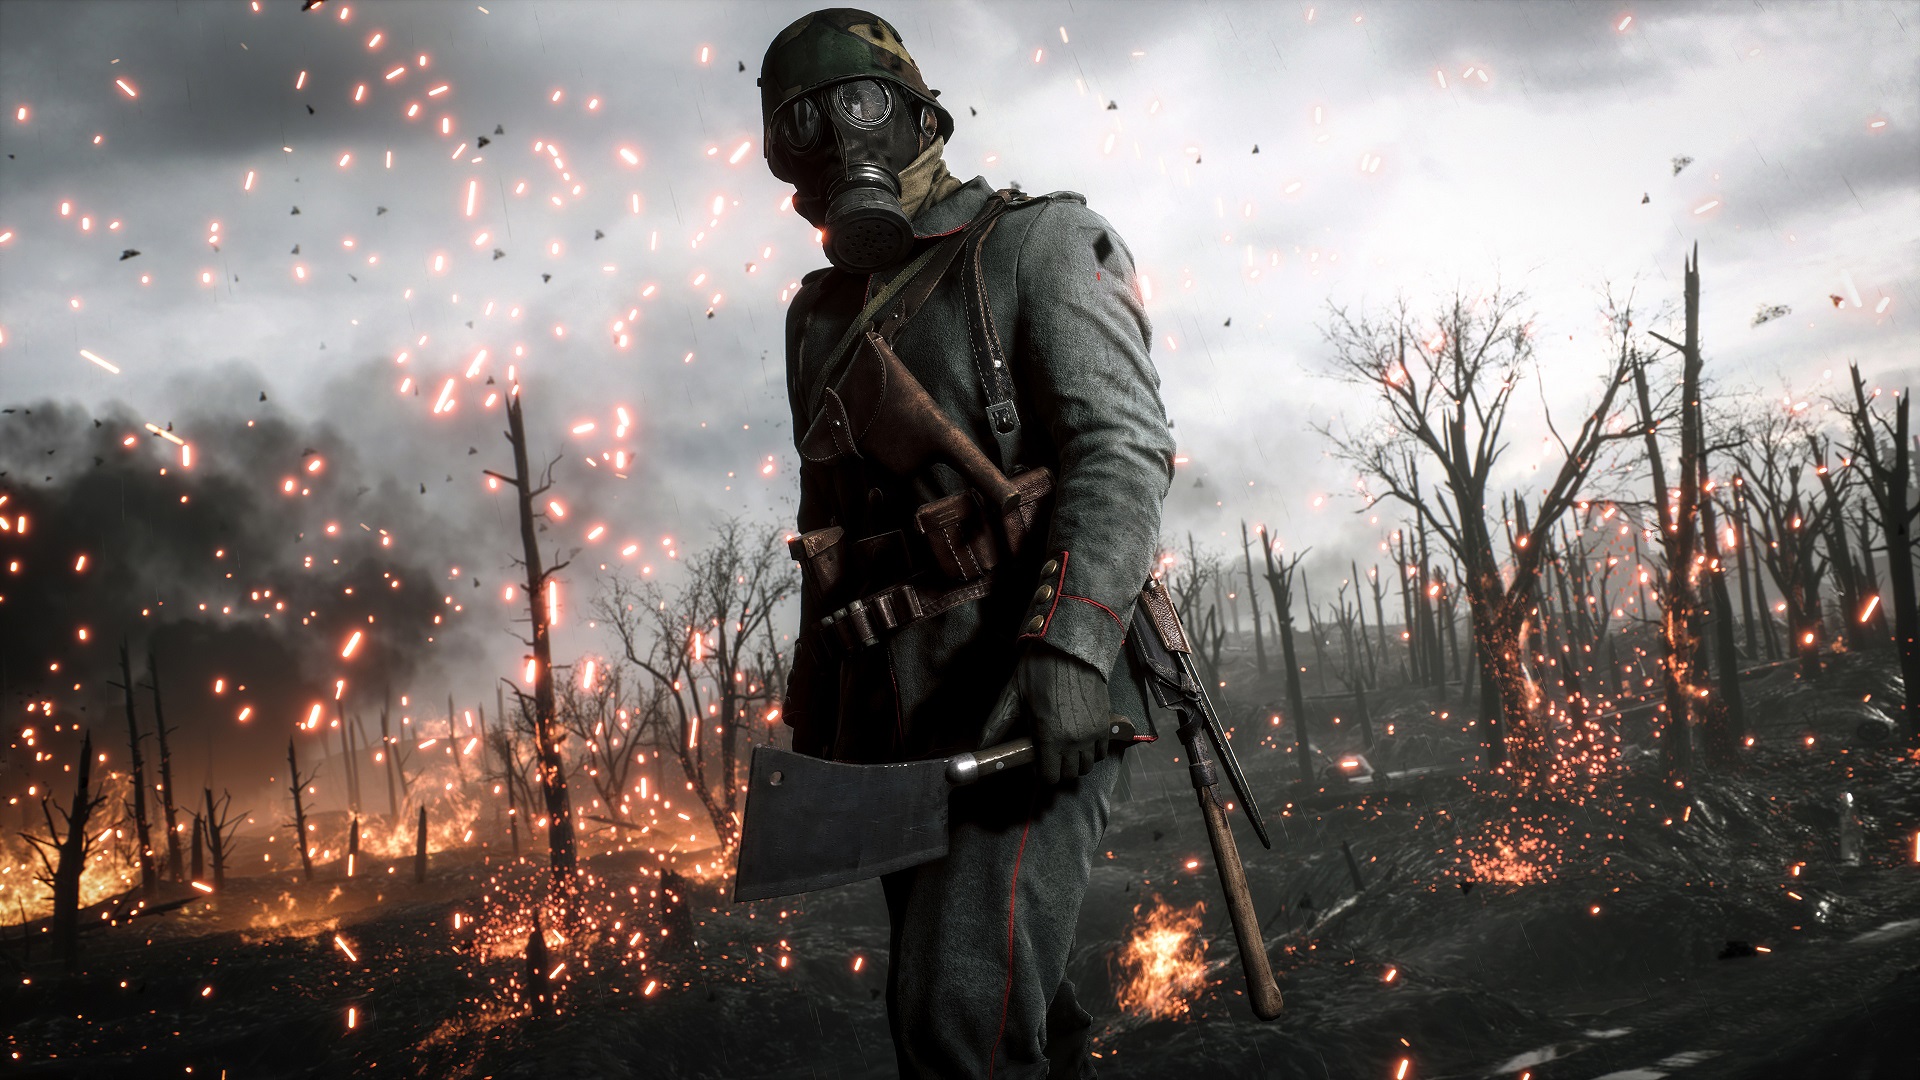 players-are-returning-to-battlefield-1-beating-2042-with-huge-numbers